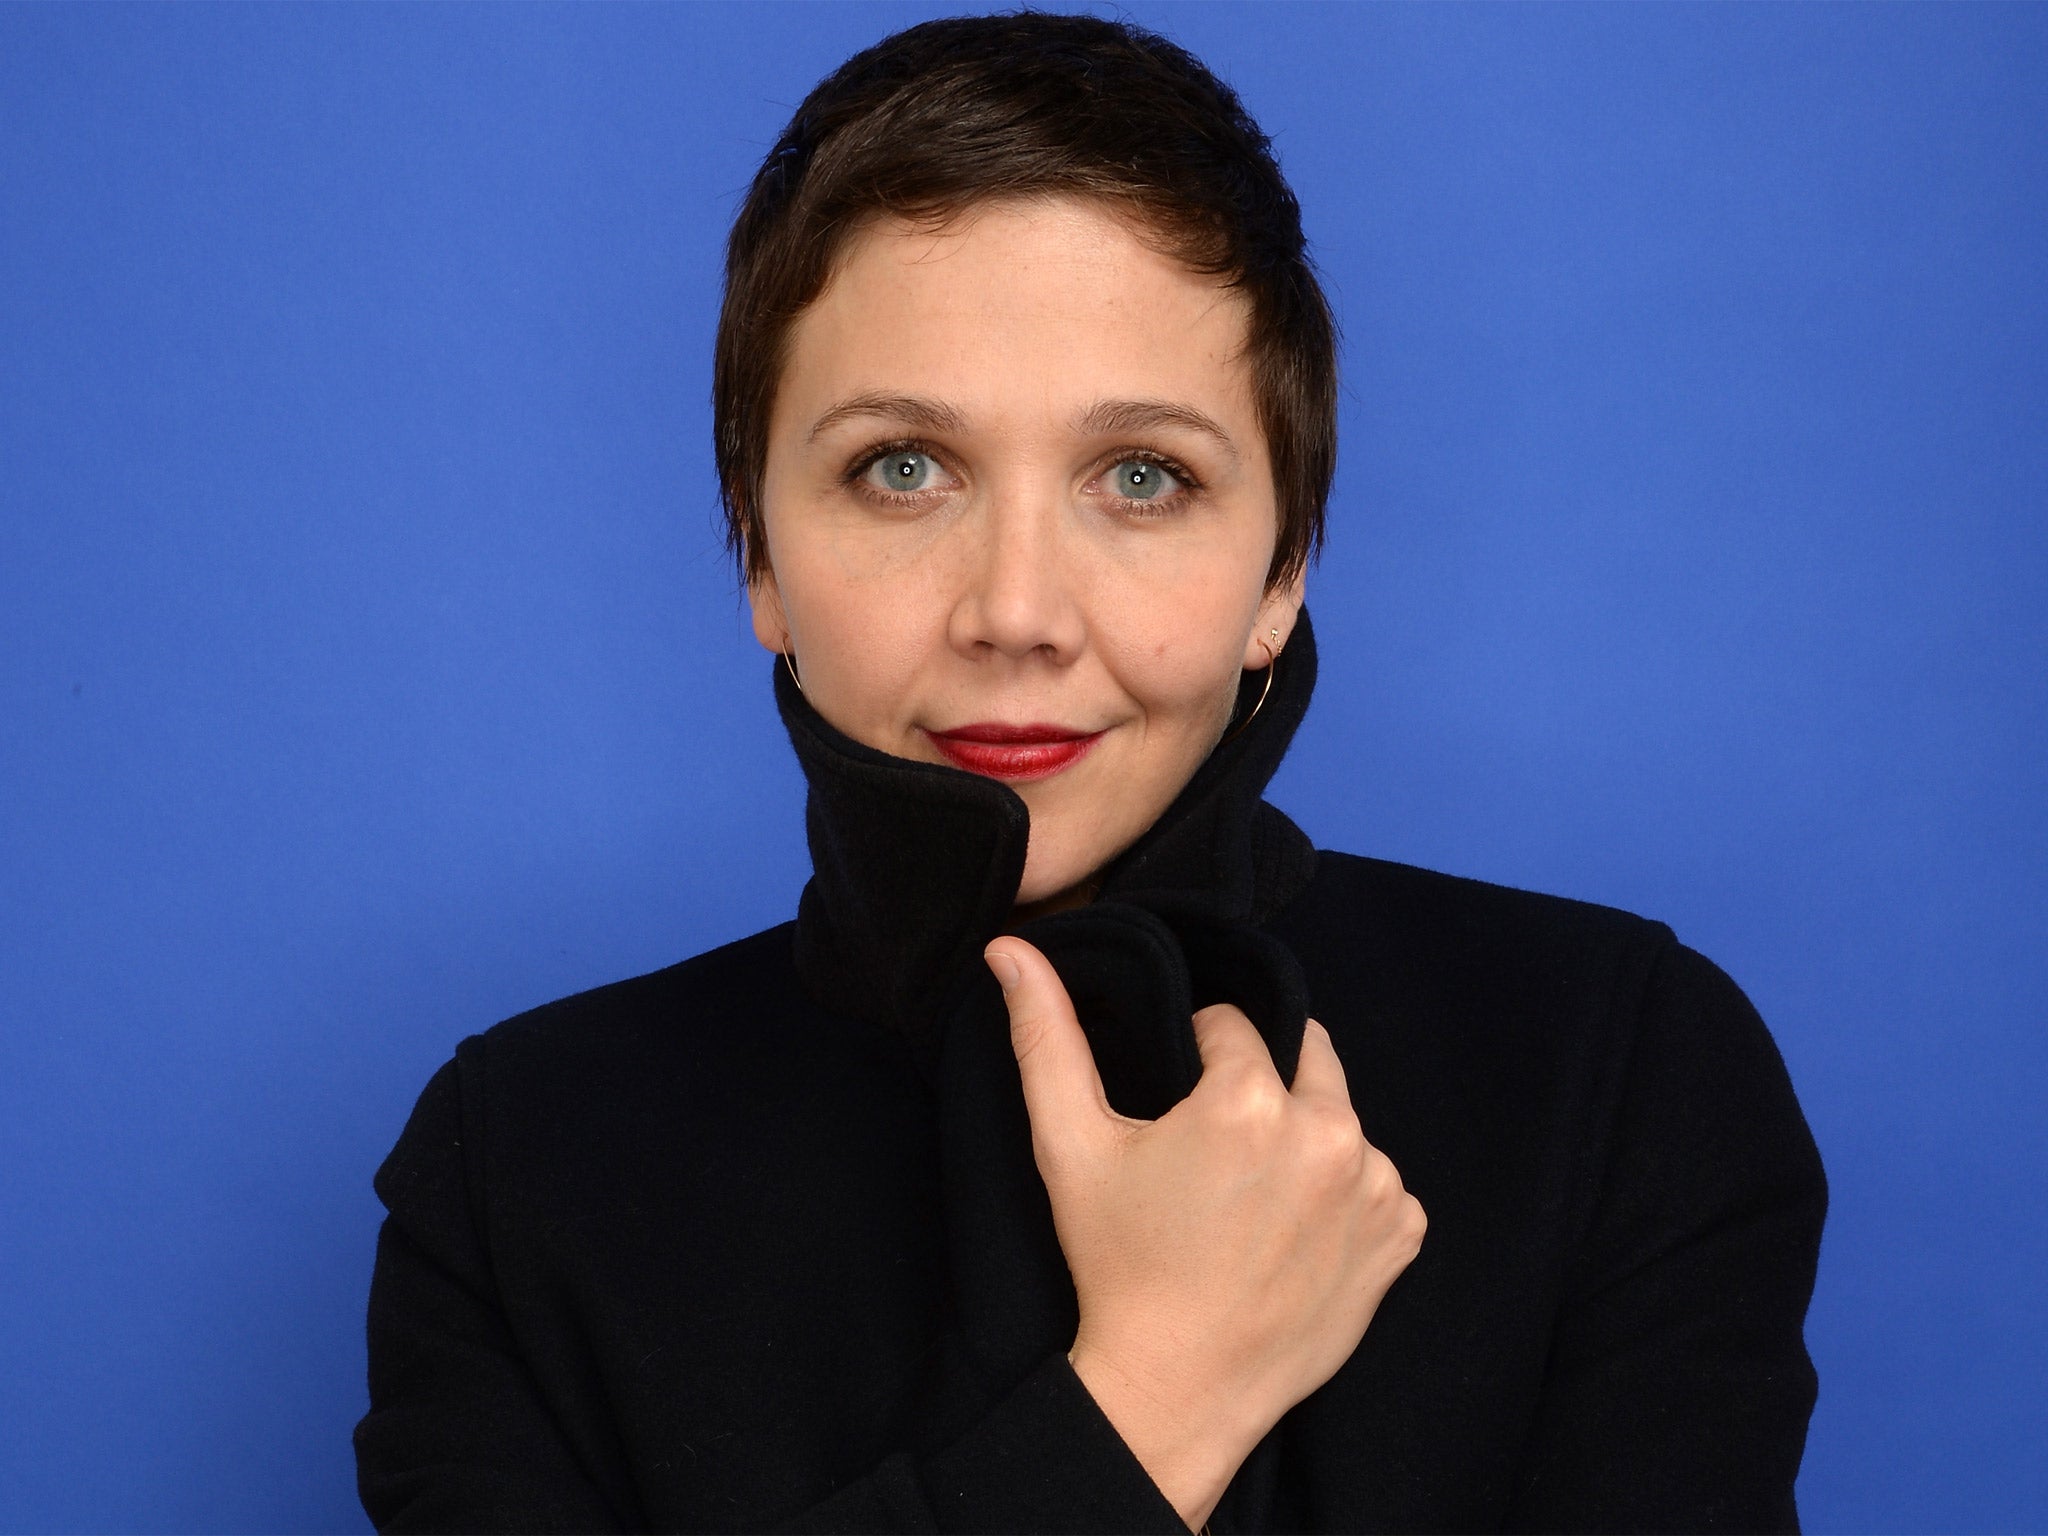 &#13;
Maggie Gyllenhaal will play prostitute Candy in The Deuce&#13;